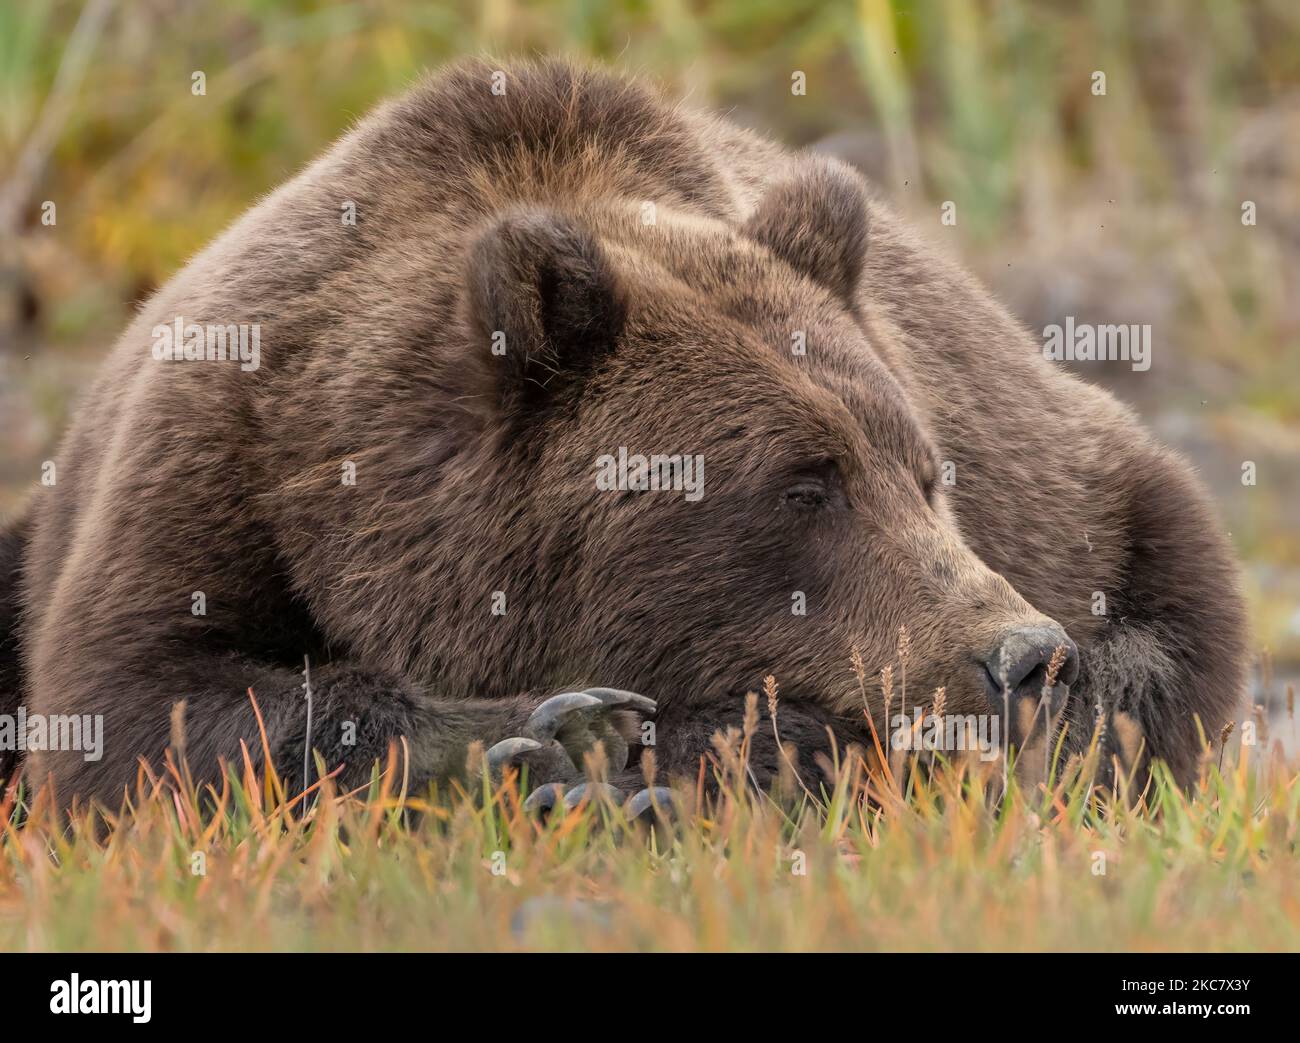 A wild Alaska Peninsula brown bear lying on the ground in a forest in daylight Stock Photo